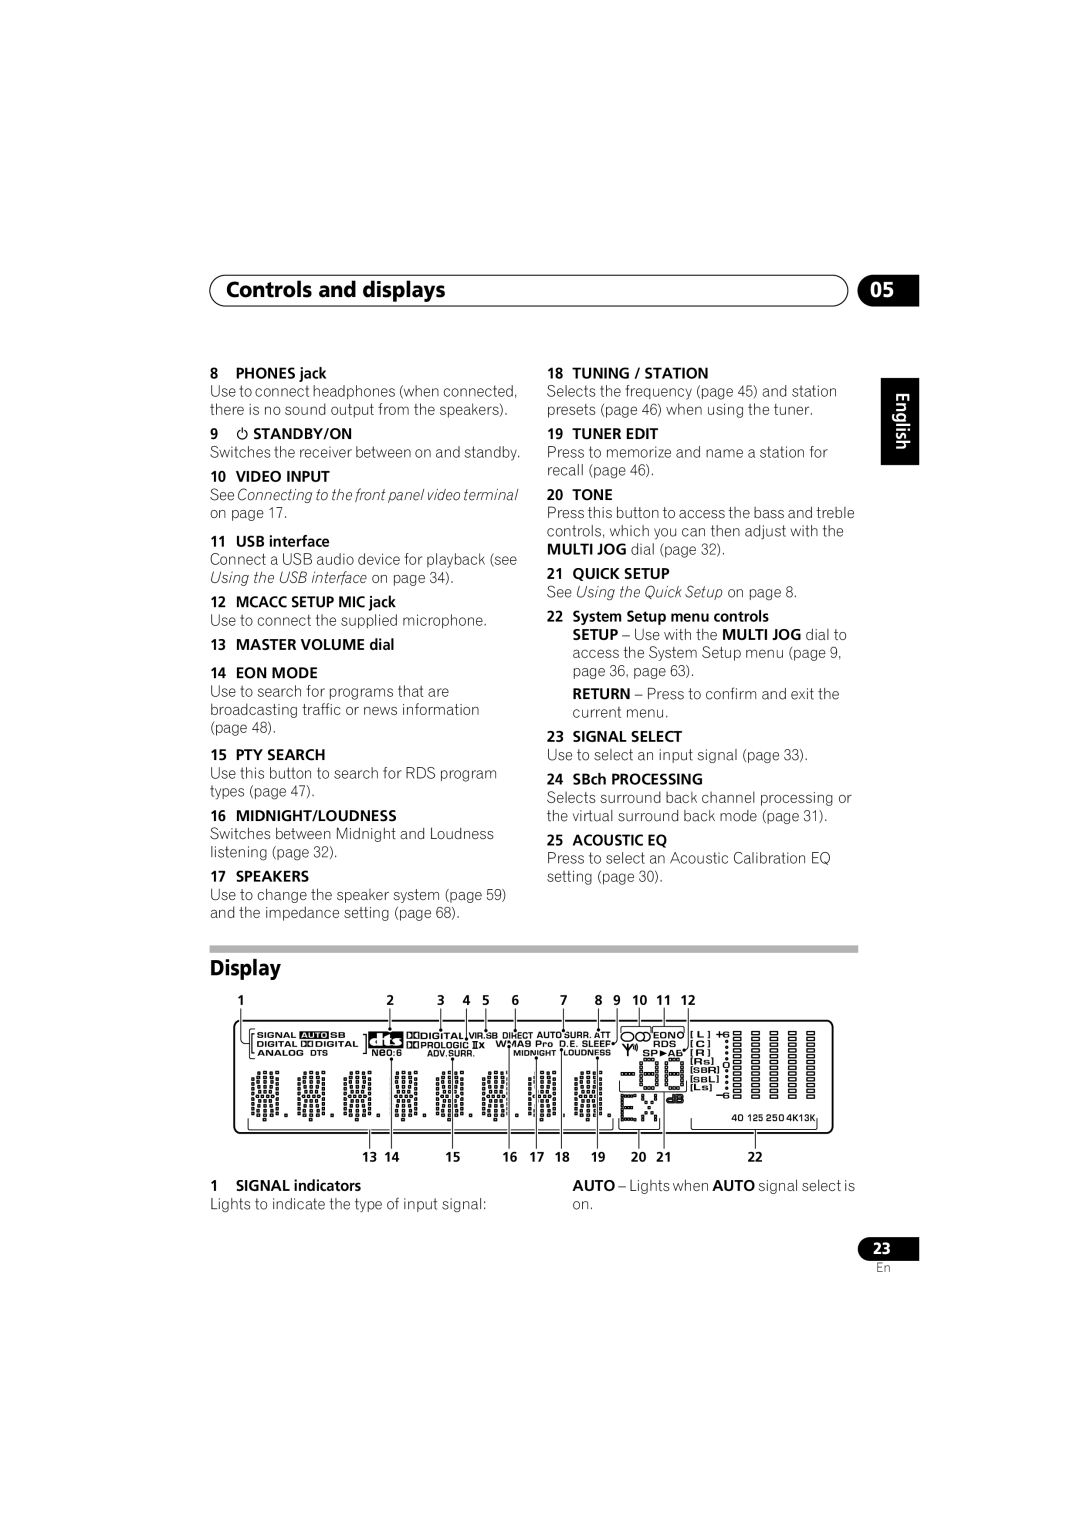 Pioneer VSX-916-K, VSX-916-S operating instructions Controls and displays, Display, See Using the Quick Setup on page 